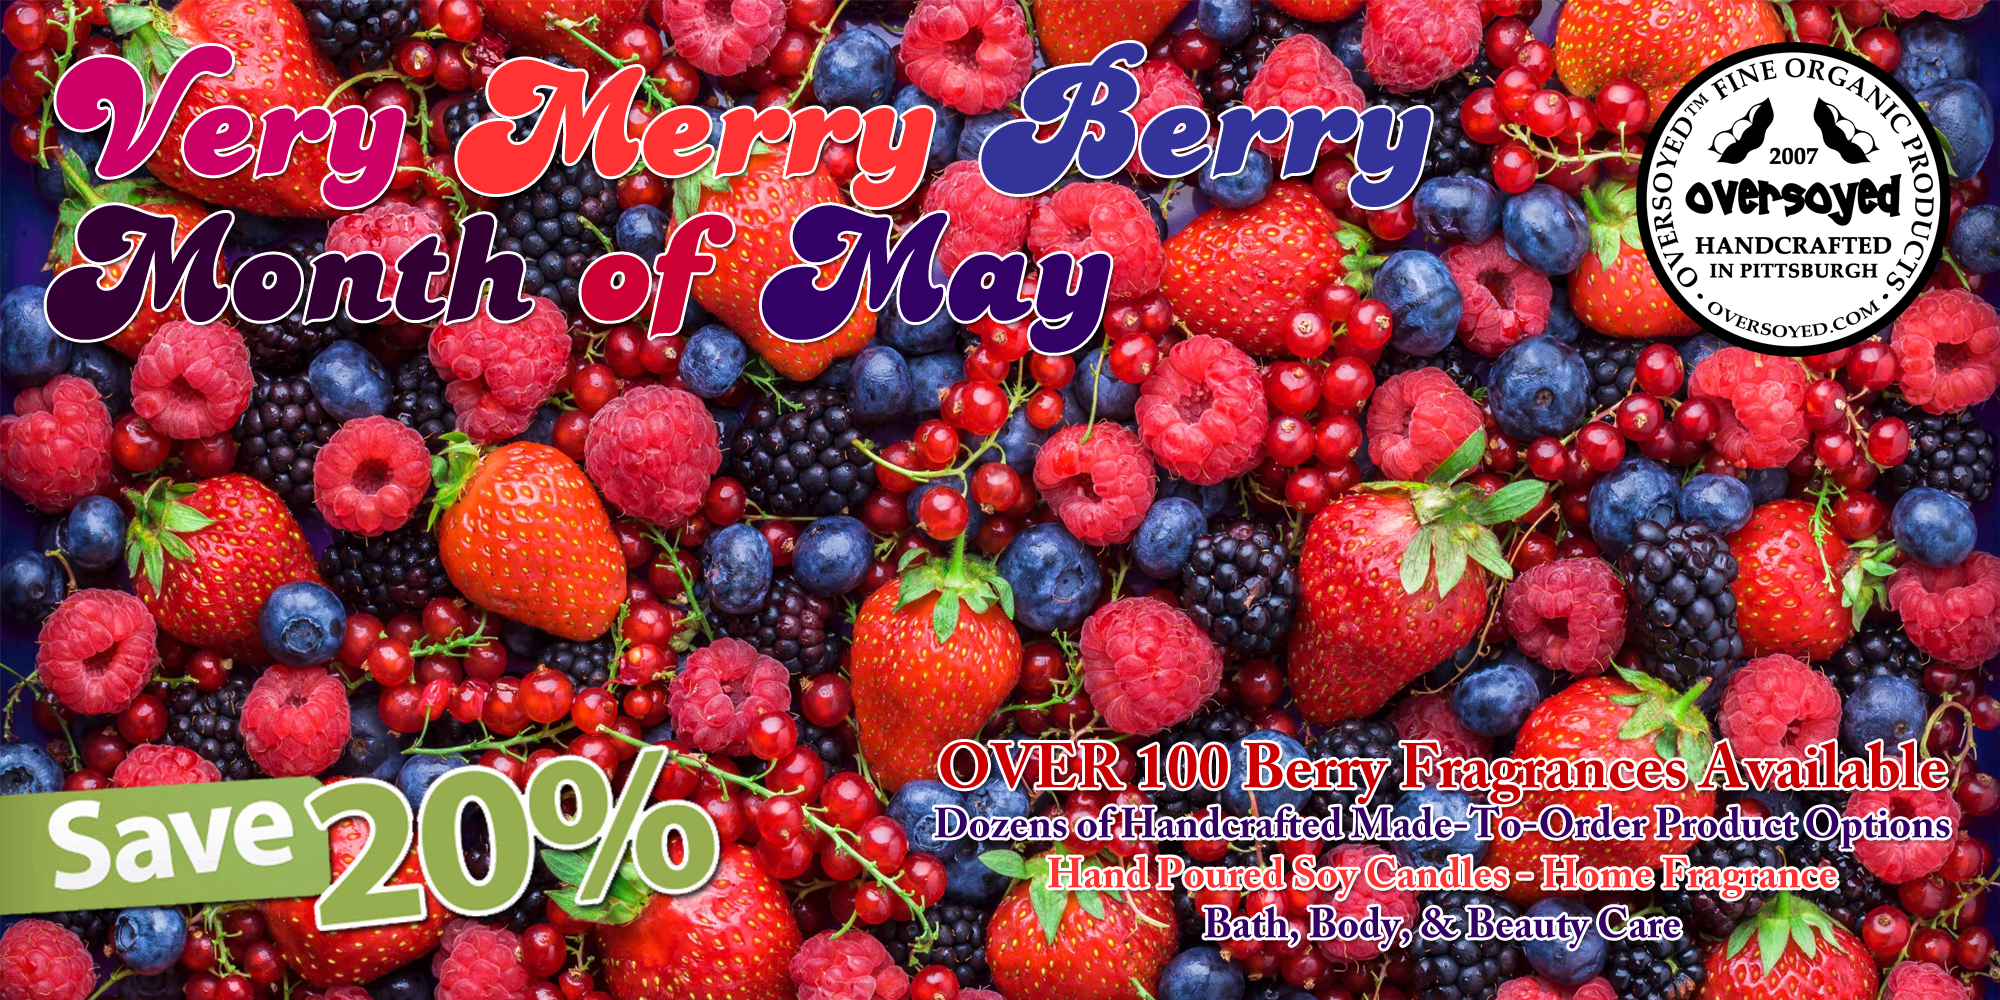 OverSoyed Fine Organic Products - Very Merry Berry Month of May